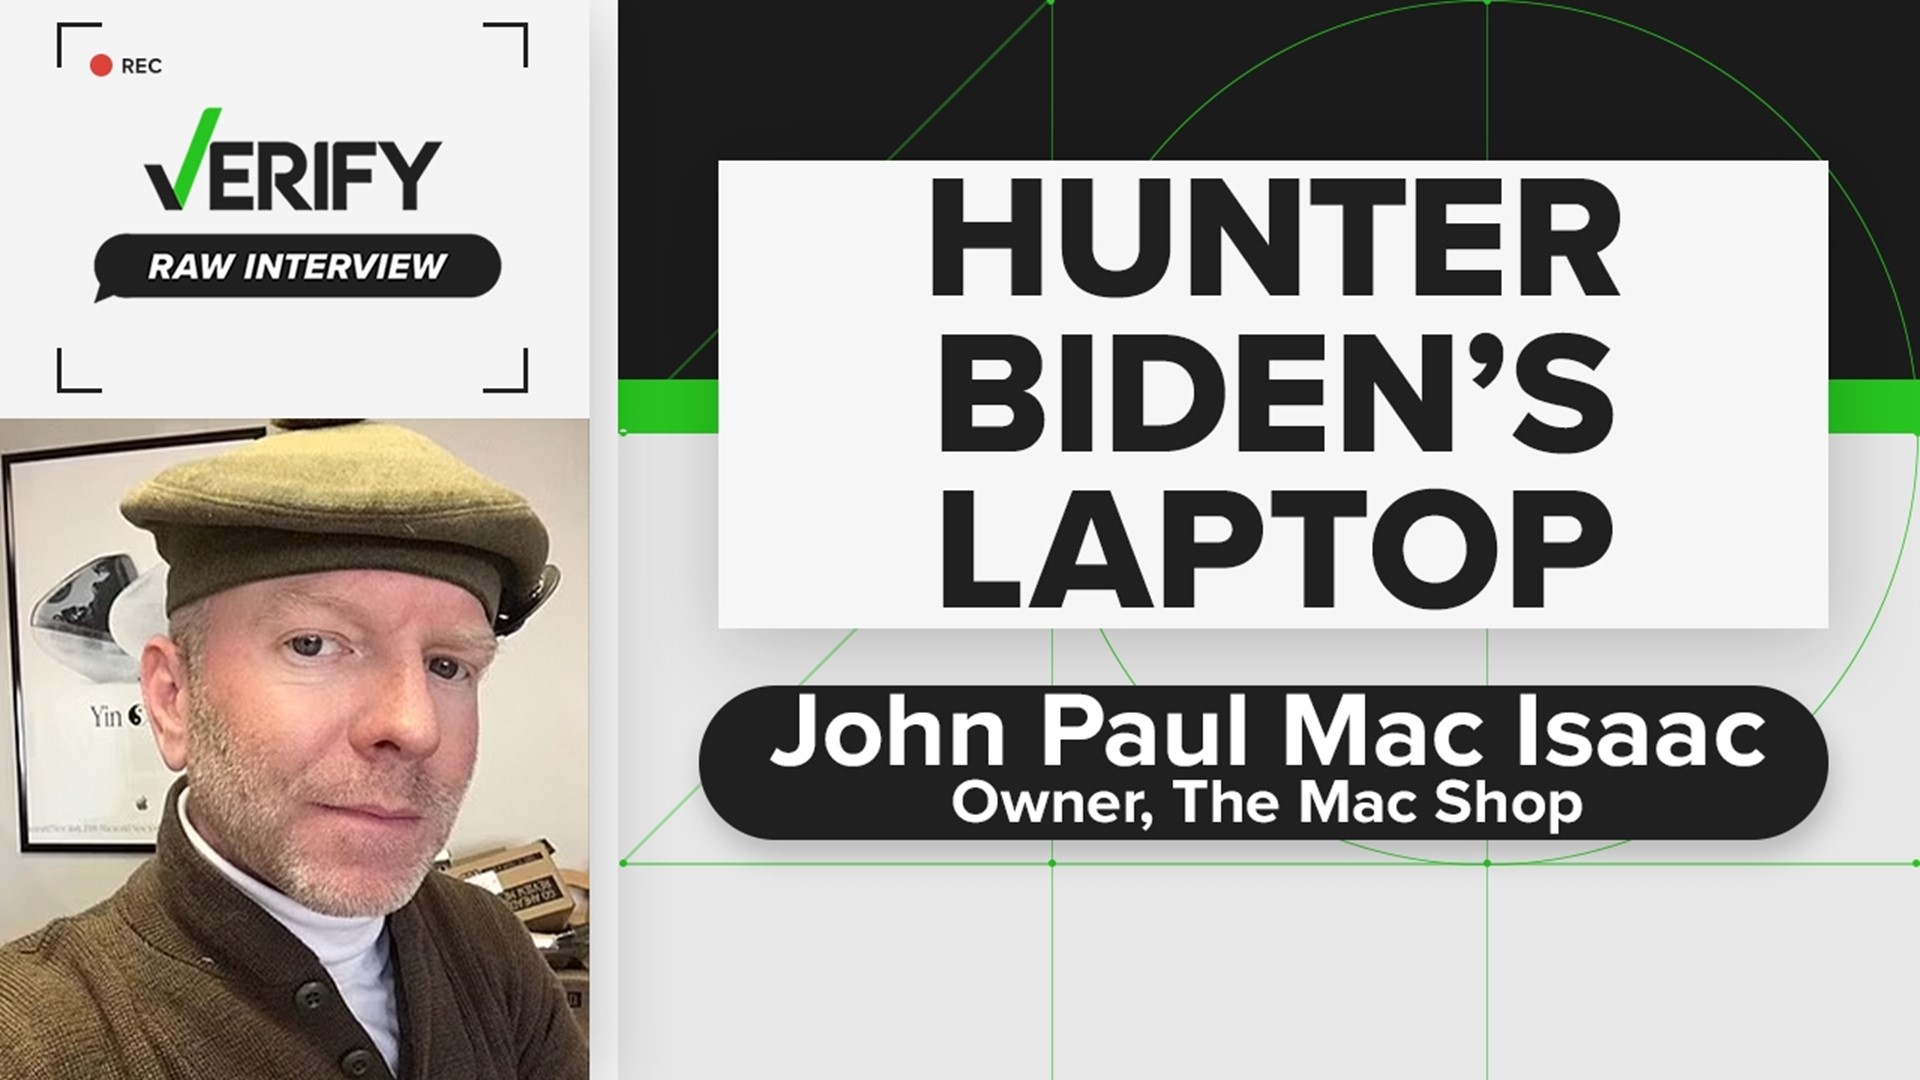 John Paul Mac Isaac is the owner of The Mac Shop. In this Raw Interview he gives a timeline of his encounter with Hunter Biden’s laptop.